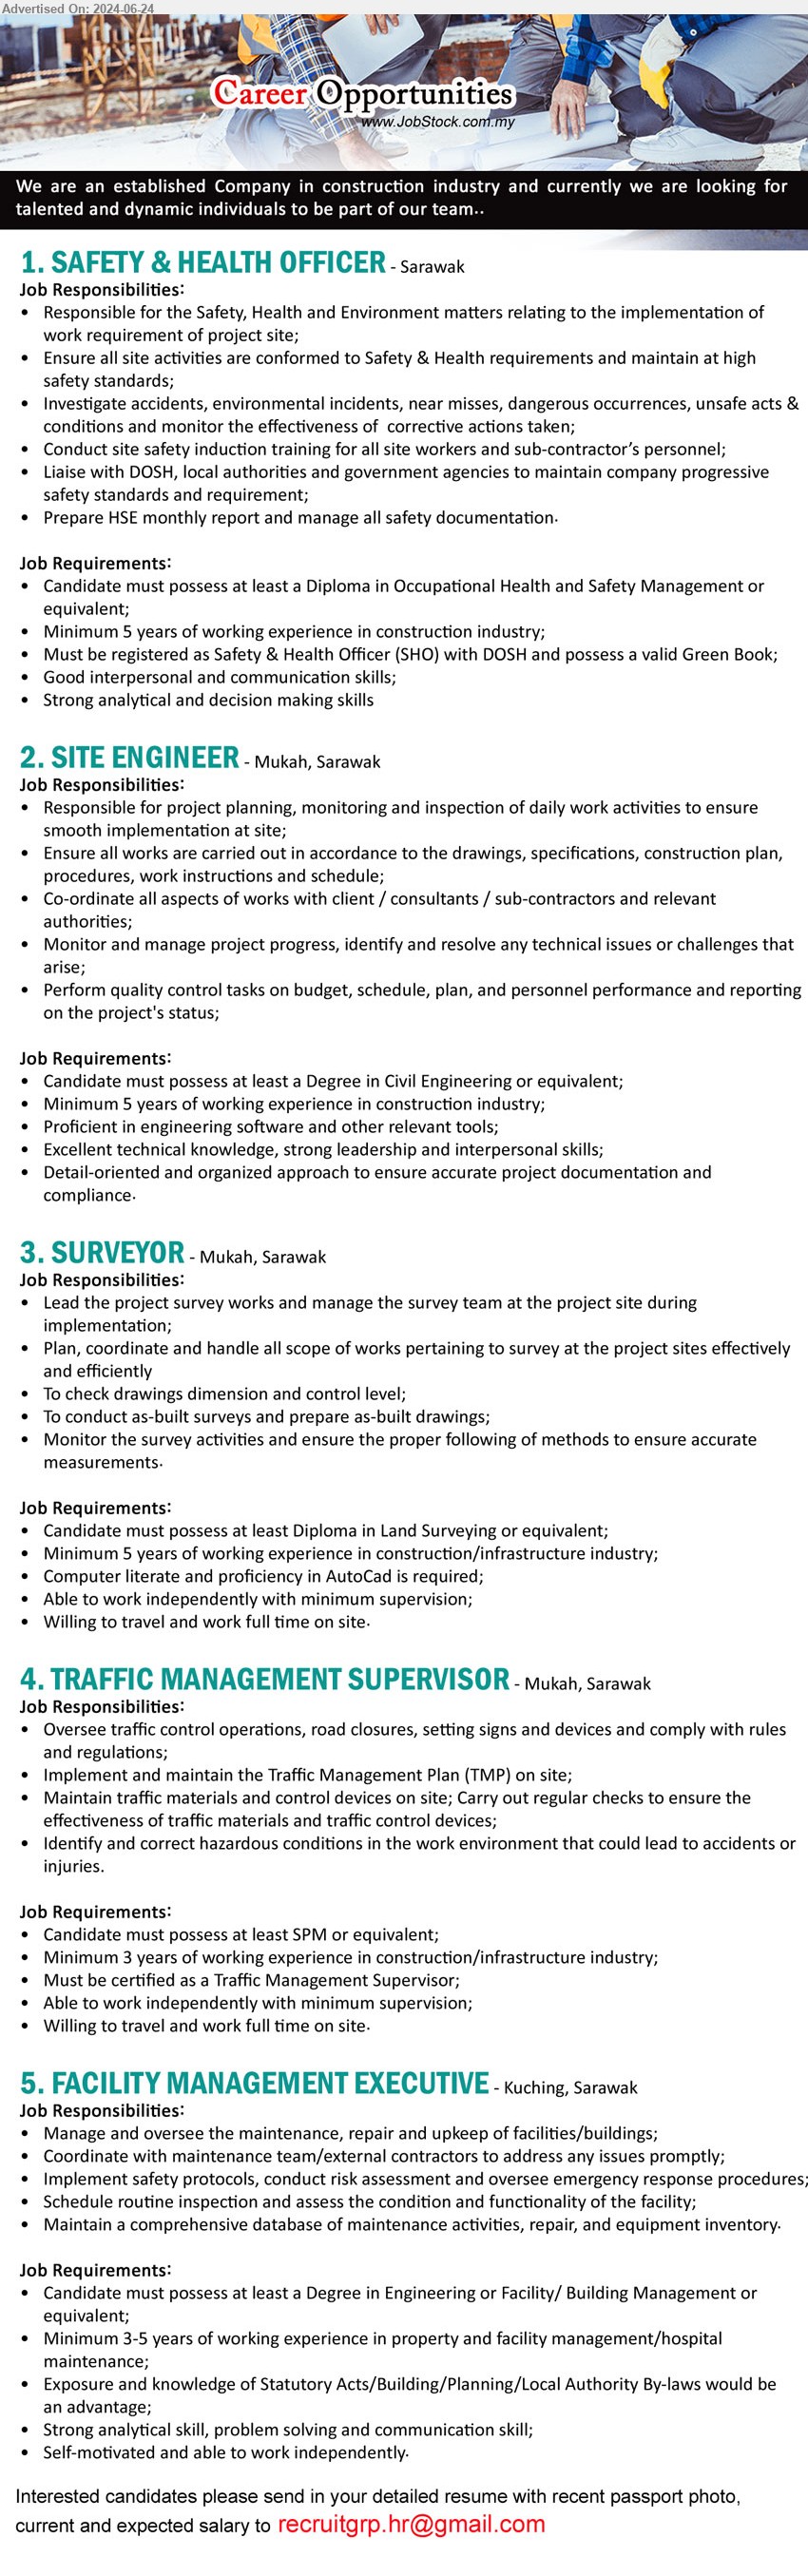 ADVERTISER (Construction Industry) - 1. SAFETY & HEALTH OFFICER (Sarawak),  Diploma in Occupational Health and Safety Management, 5 yrs. exp....
2. SITE ENGINEER (Mukah), Degree in Civil Engineering, 5 years of working experience in construction industry,...
3. SURVEYOR  (Mukah), Diploma in Land Surveying , 5 years of working experience in construction/infrastructure industry,...
4. TRAFFIC MANAGEMENT SUPERVISOR (Mukah), SPM, Minimum 3 years of working experience in construction/infrastructure industry;,...
5. FACILITY MANAGEMENT EXECUTIVE (Kuching), Degree in Engineering or Facility/ Building Management,...
Email resume to ...